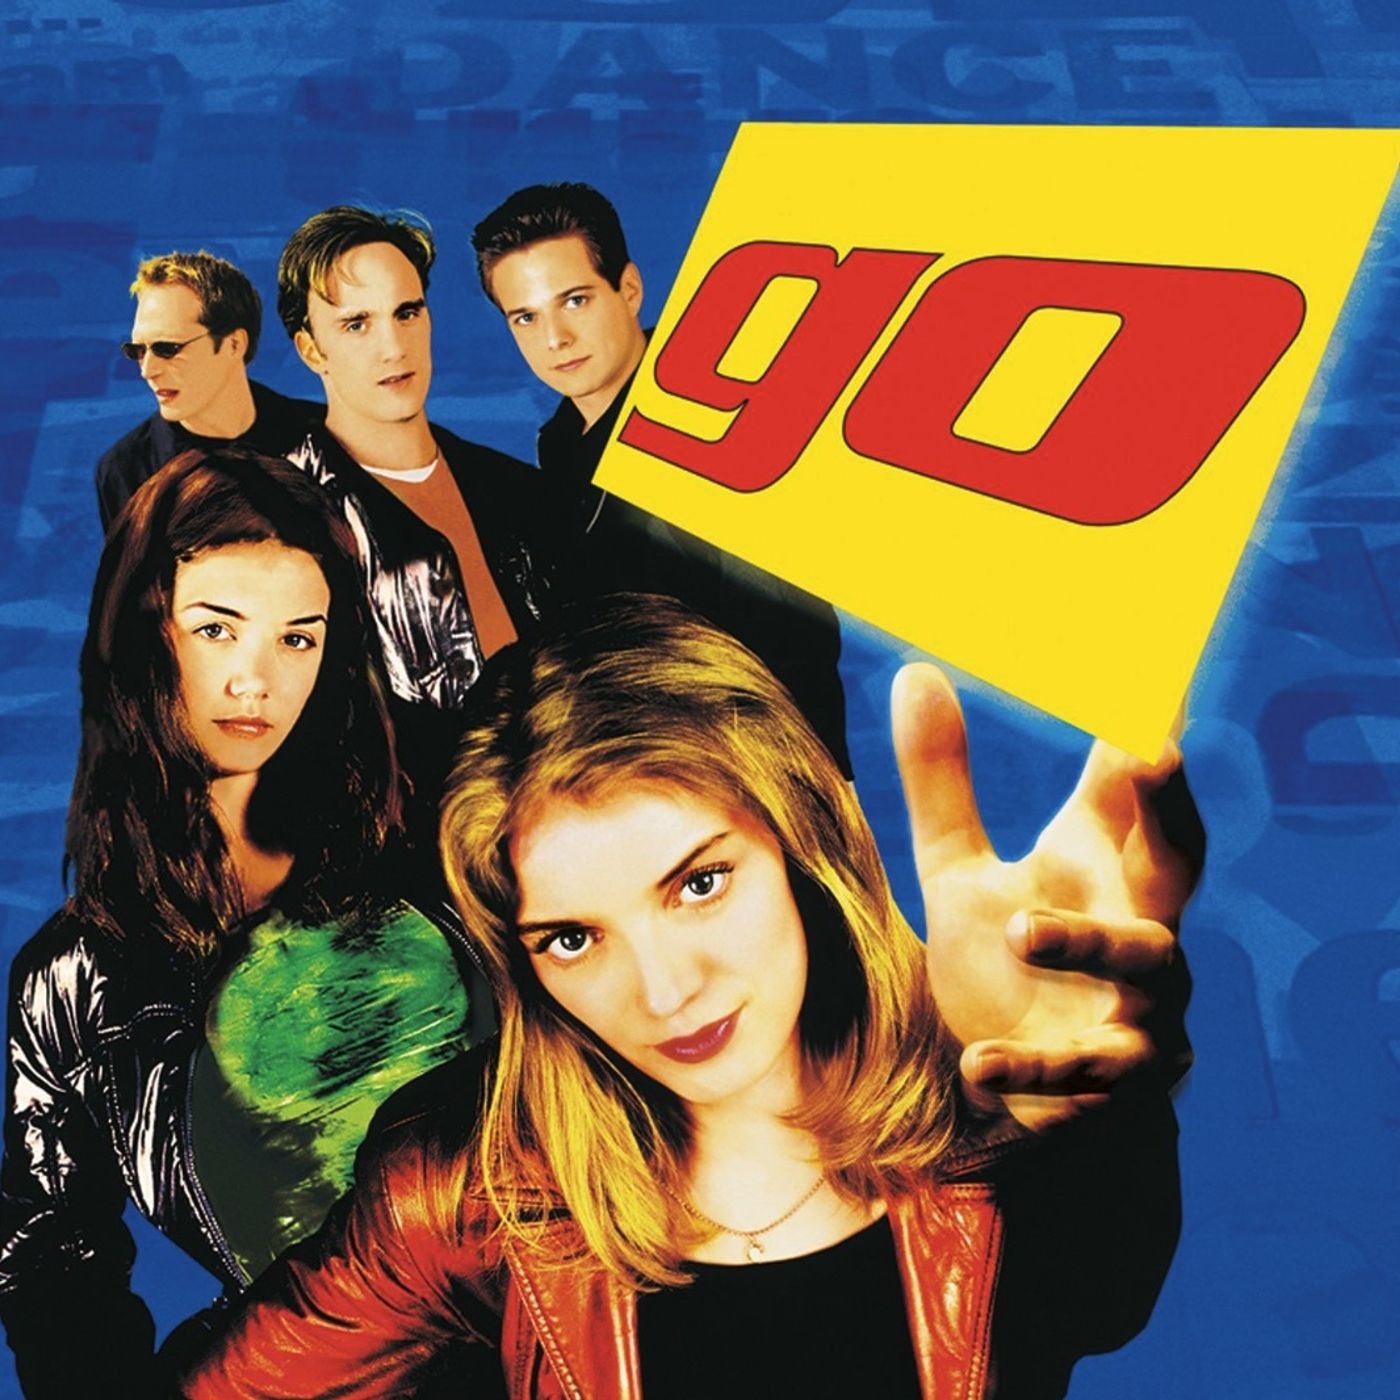 After Dark Preview: Doug Liman's 'Go' (1999)